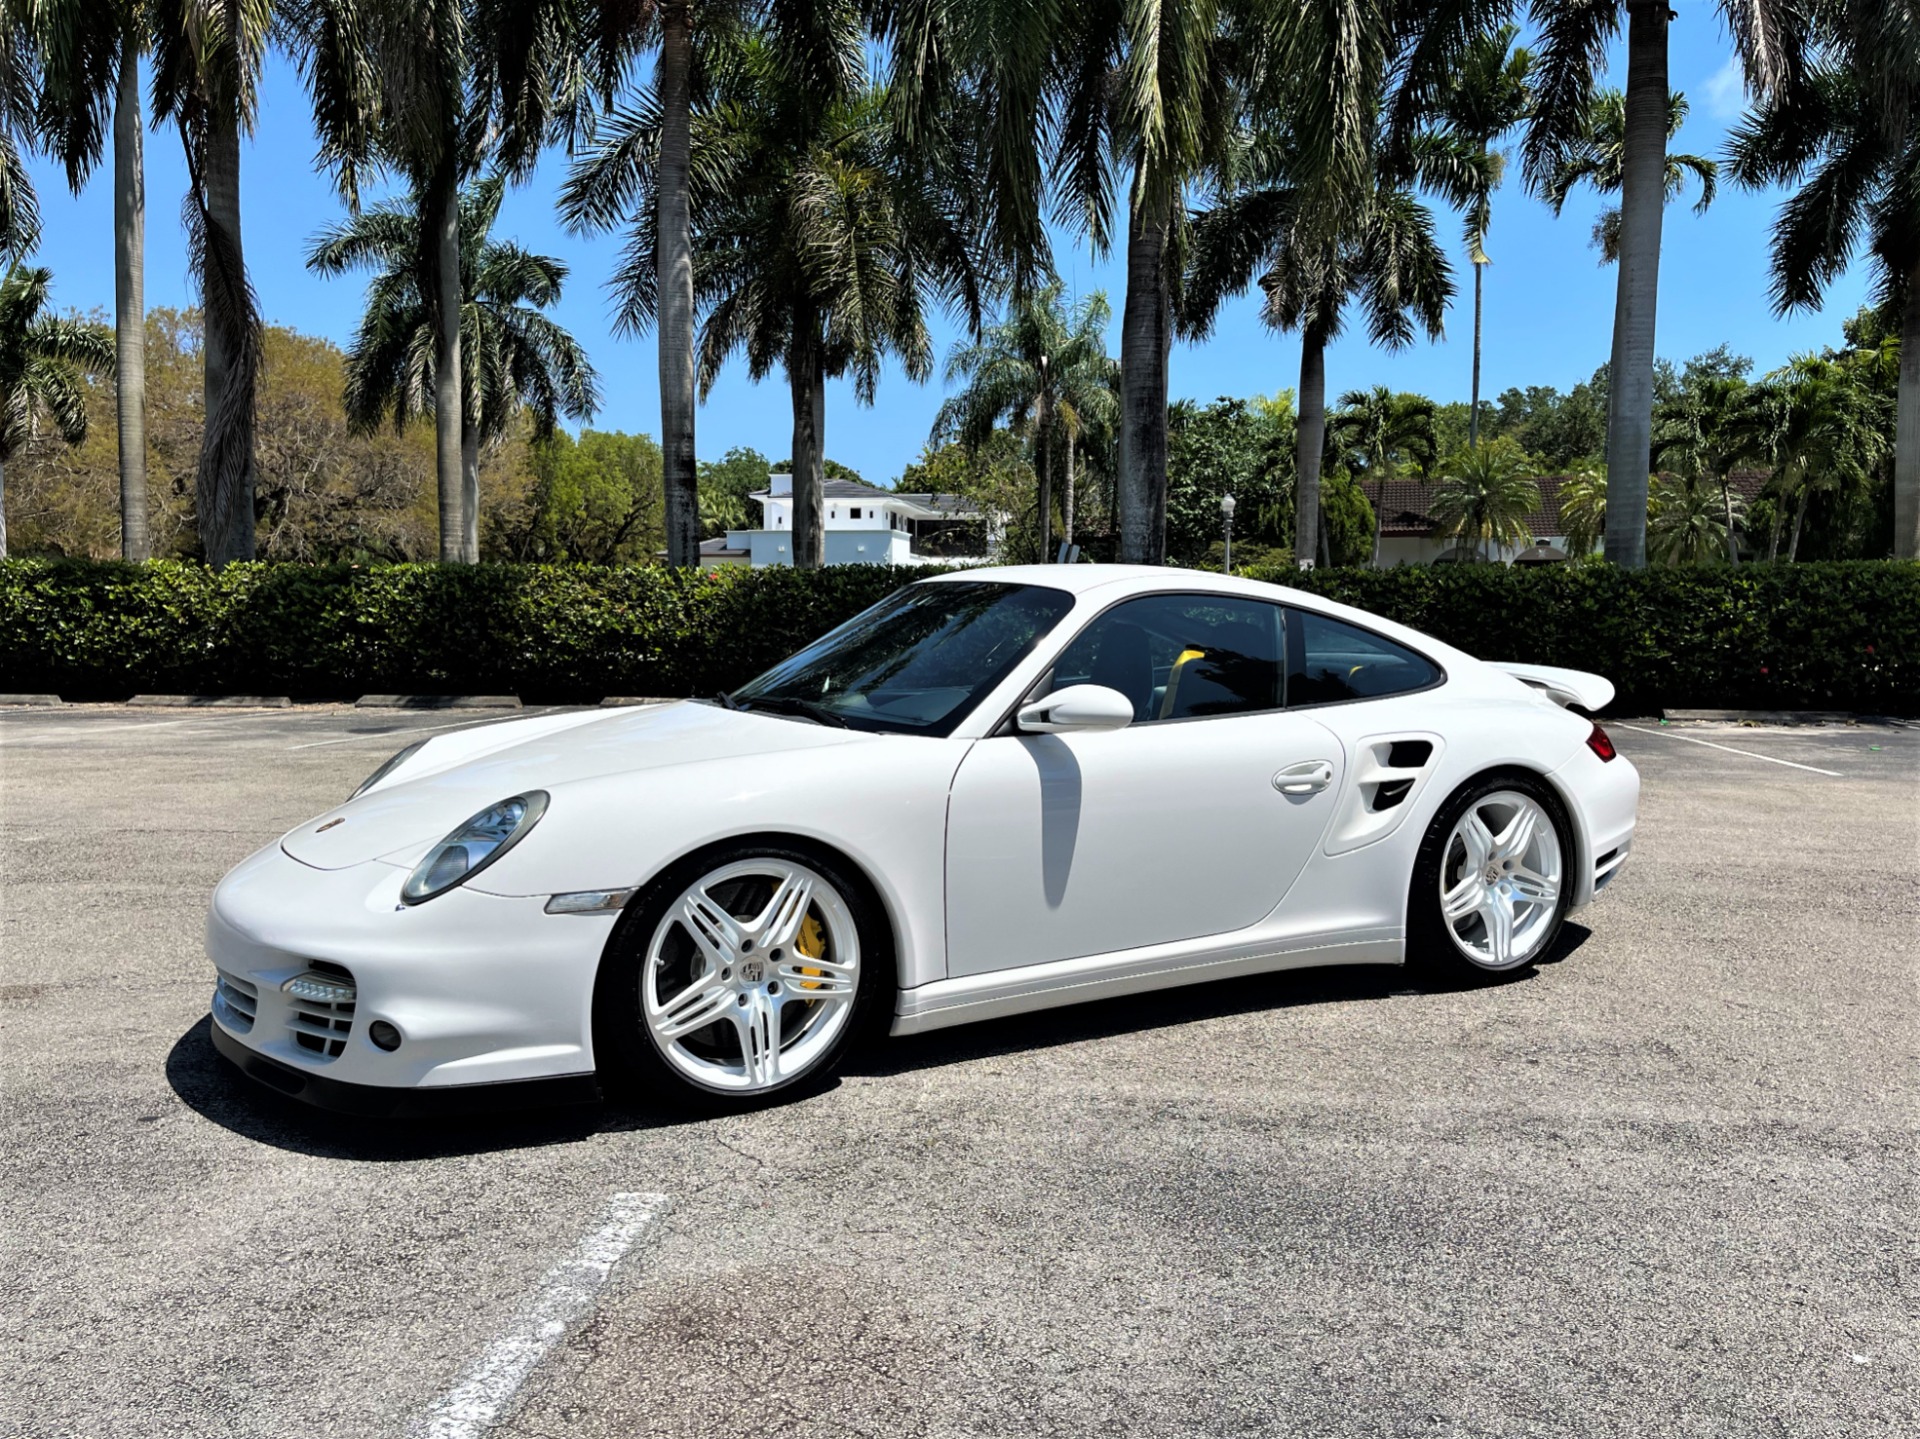 Used 2008 Porsche 911 Turbo for sale $124,850 at The Gables Sports Cars in Miami FL 33146 4